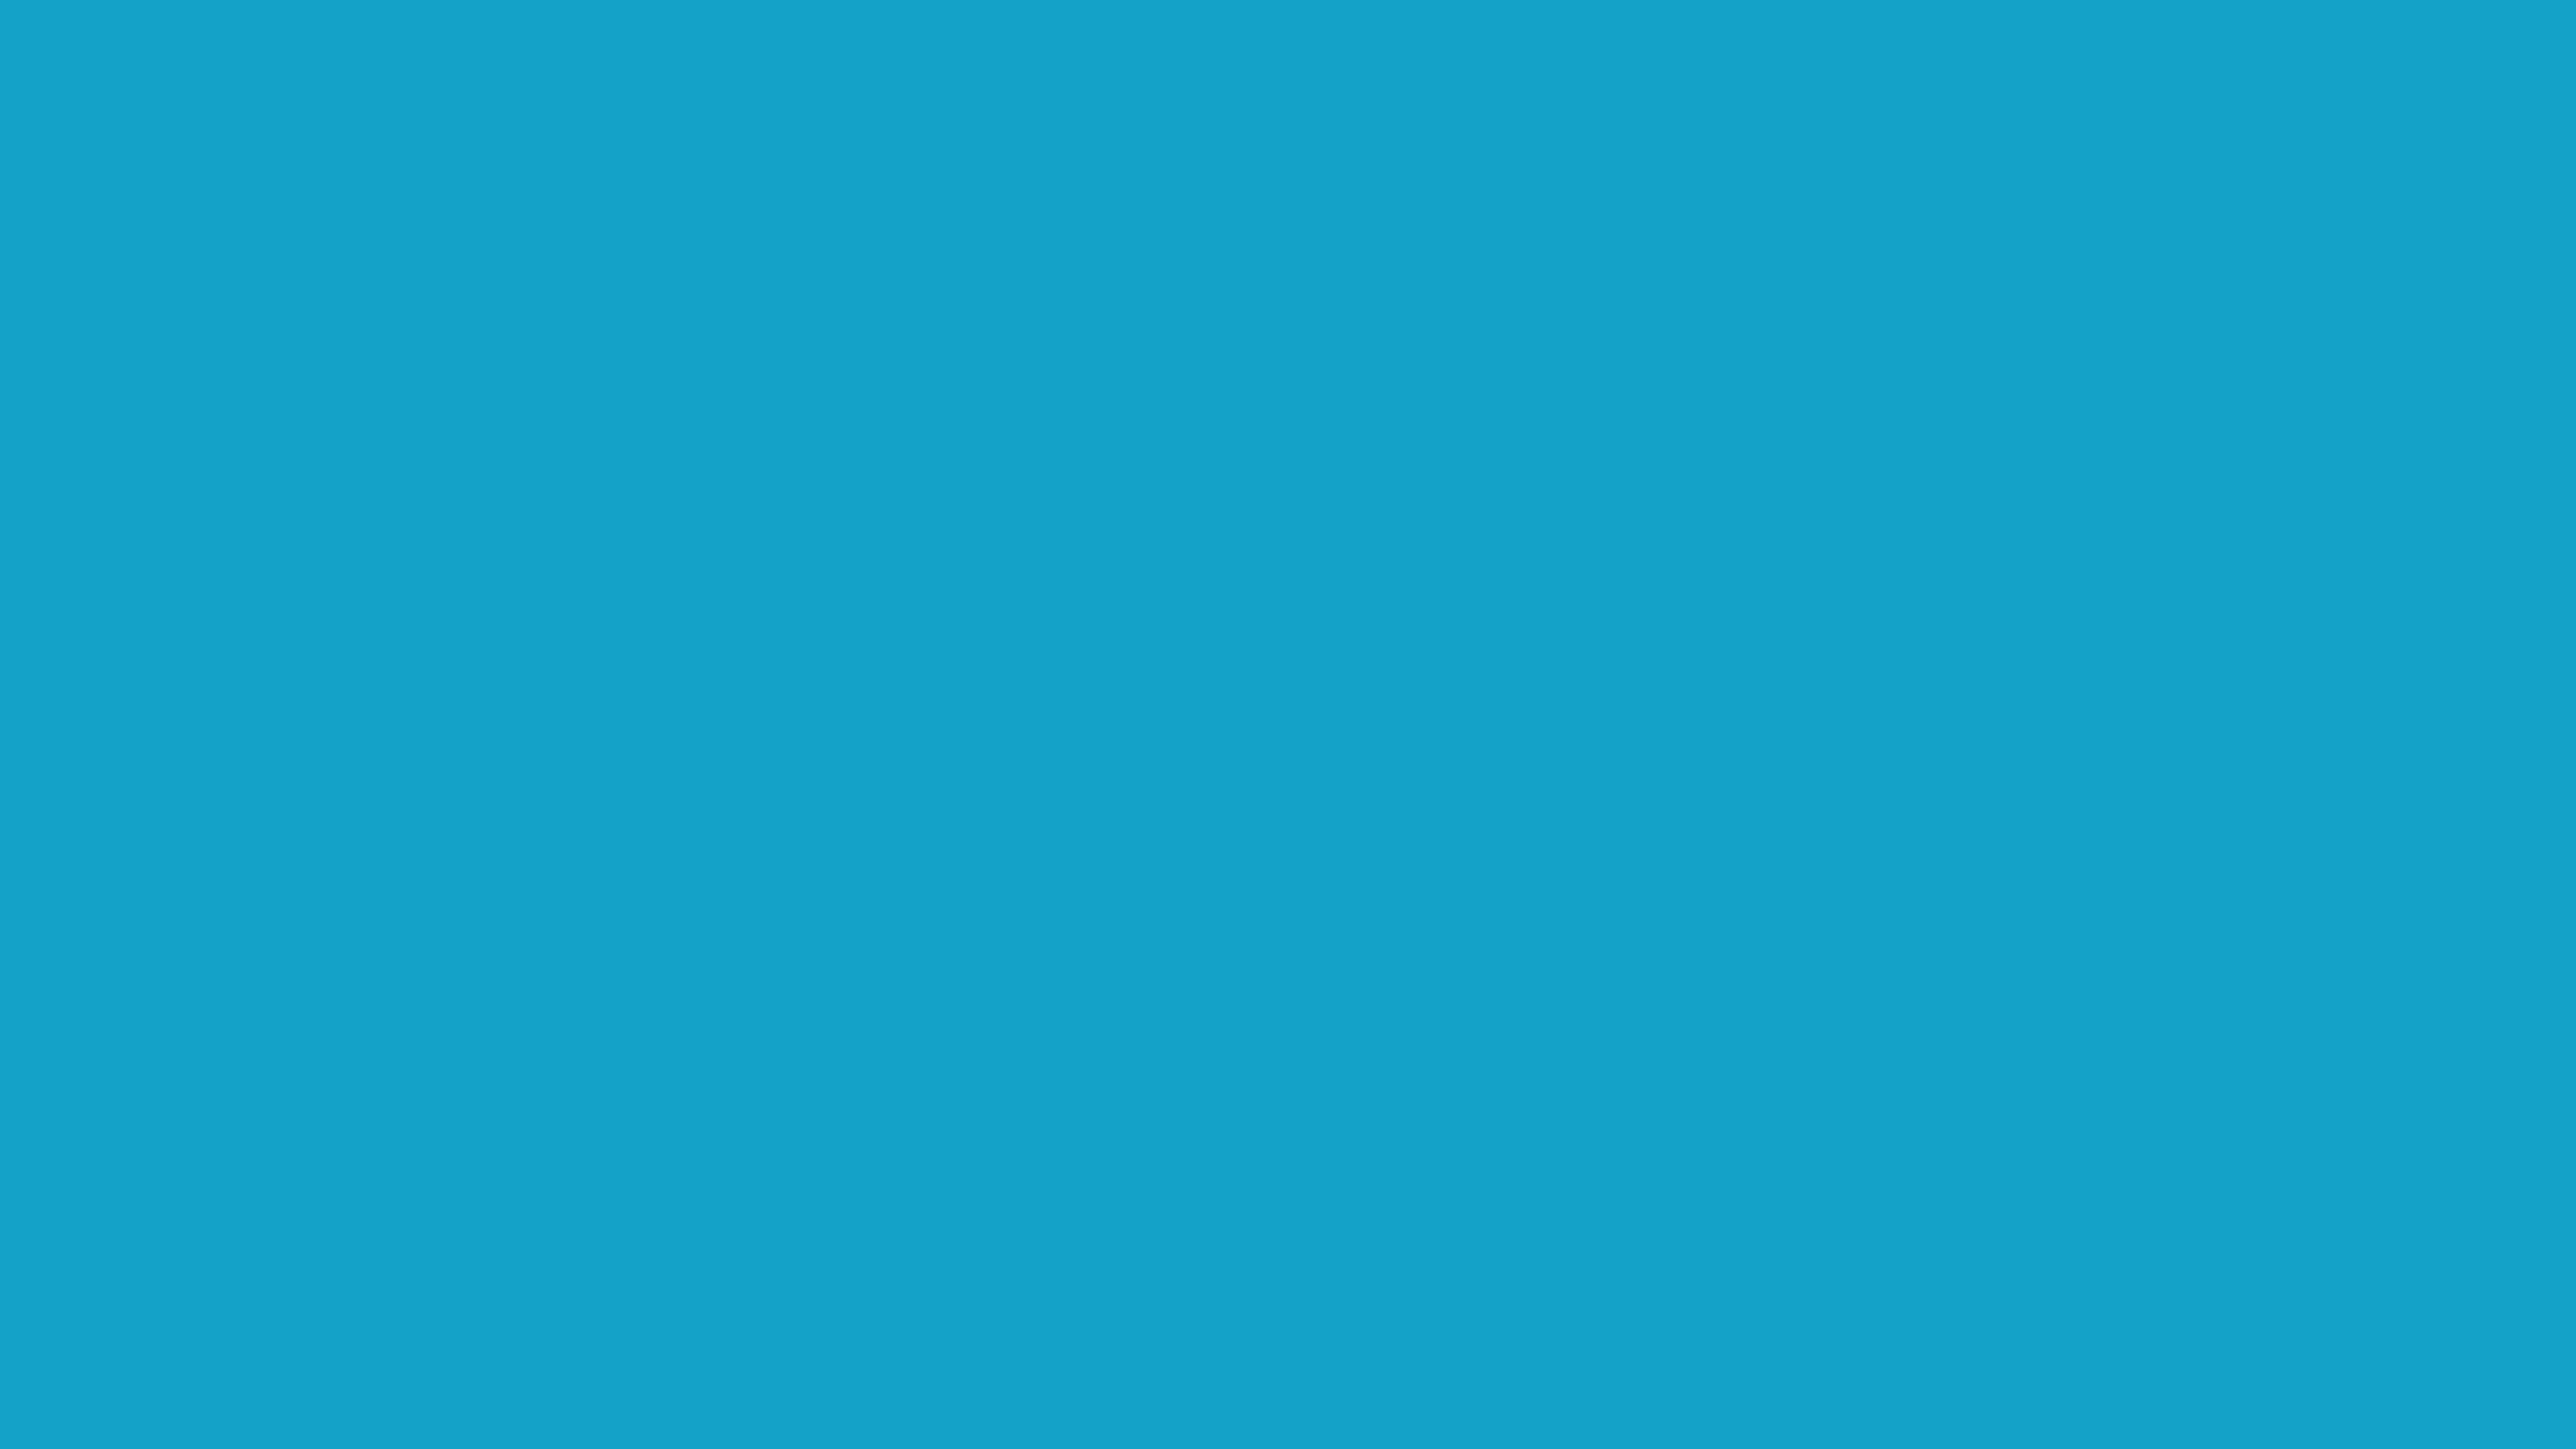 Cyan Blue Solid Color Background Image | Free Image Generator